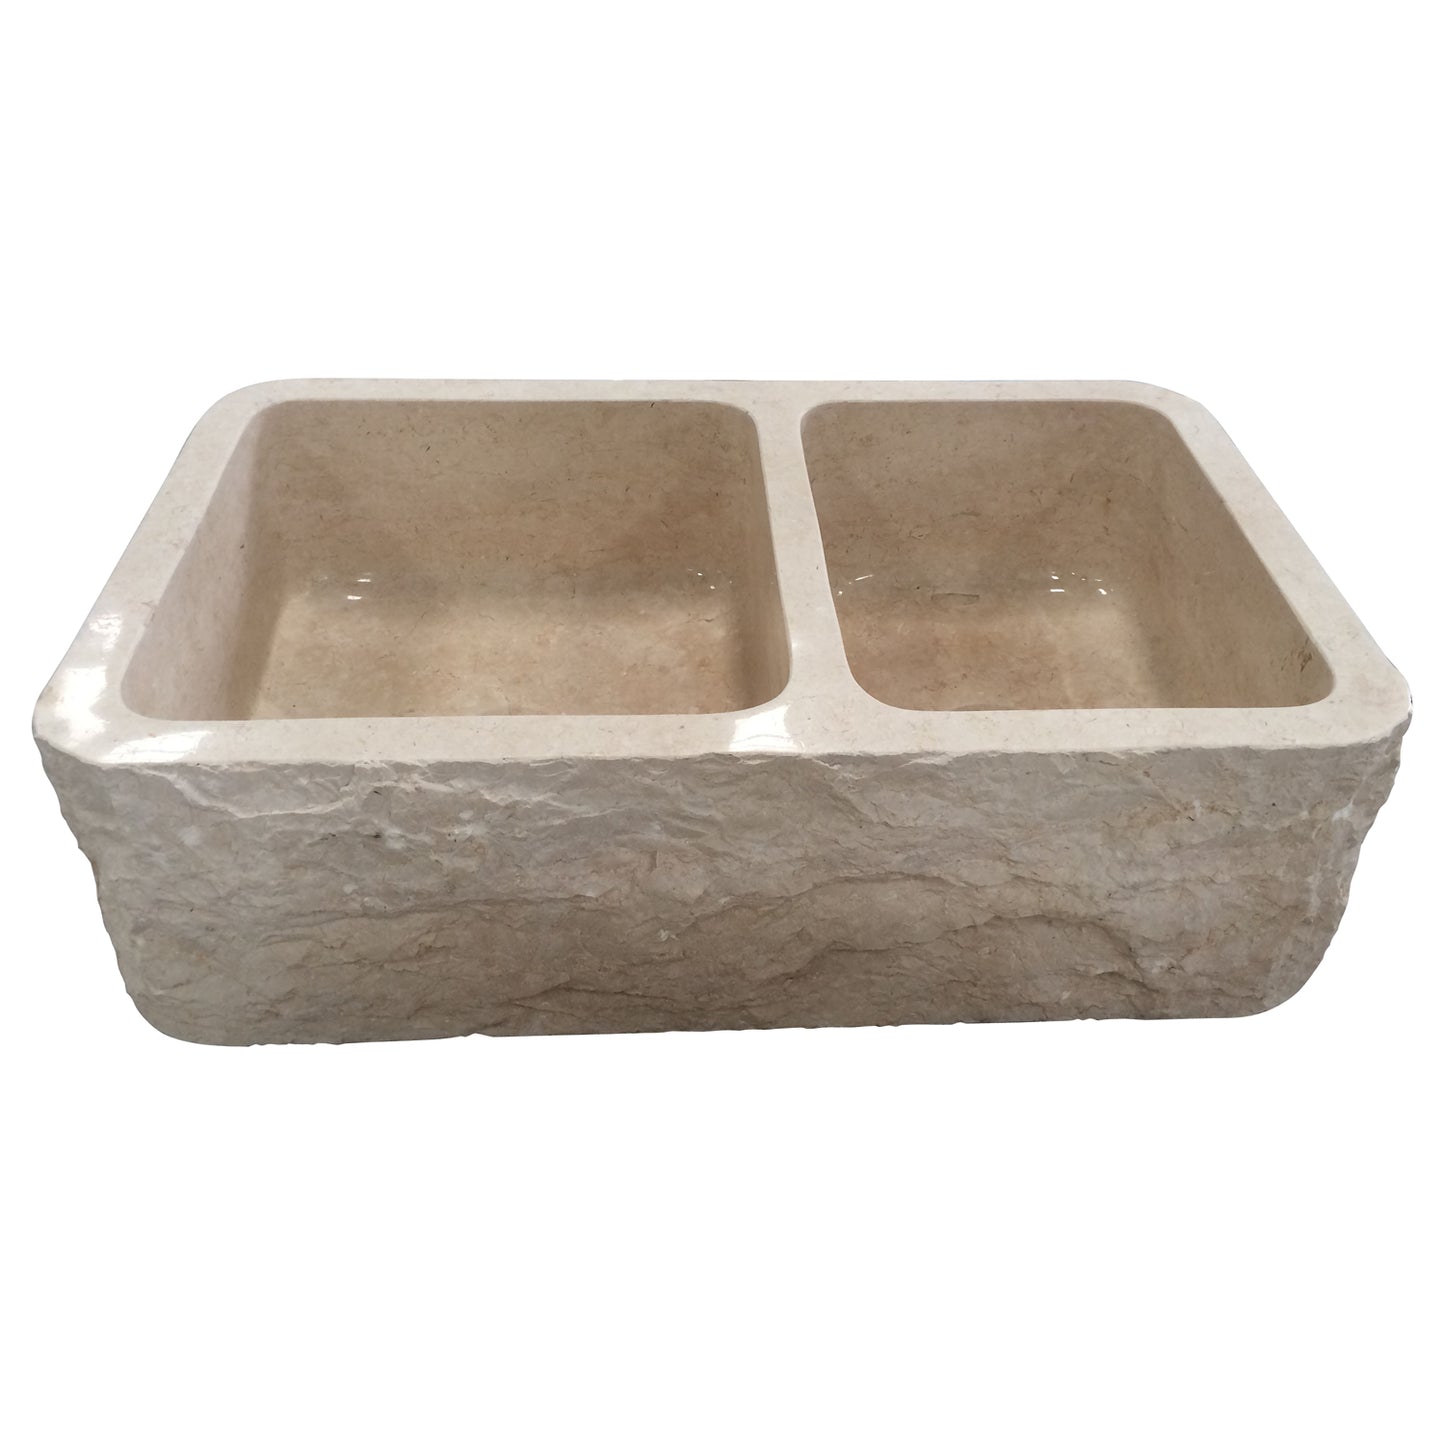 Ranier 36" Offset Double Bowl Marble Apron Kitchen Sink Chiseled Front